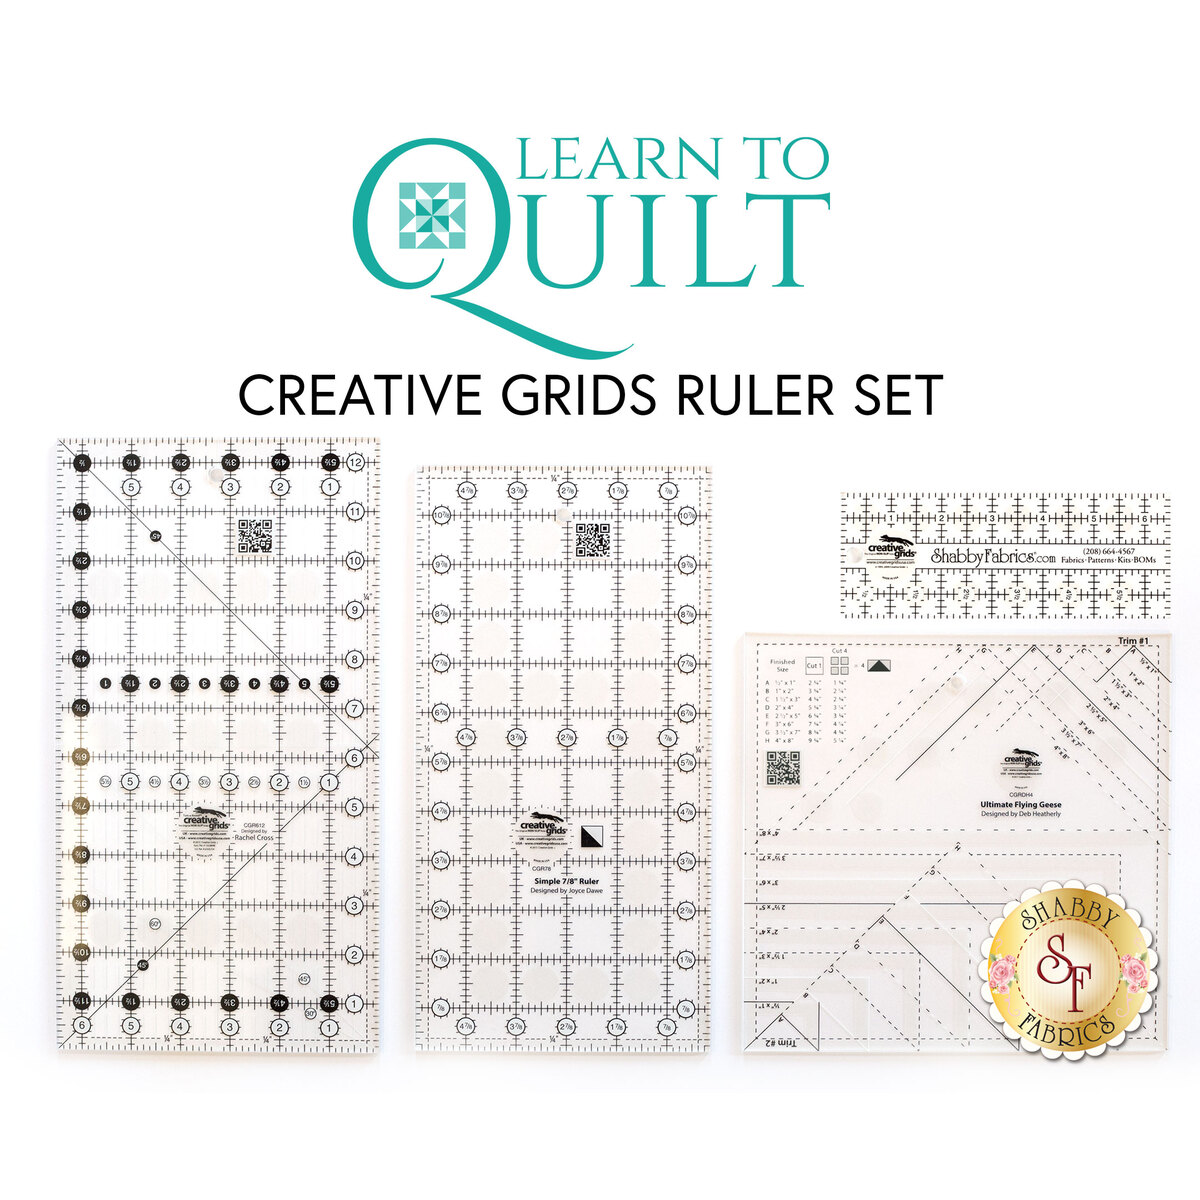 Machine Quilting with Rulers - Basic Ruler Quilting Kit for Beginners –